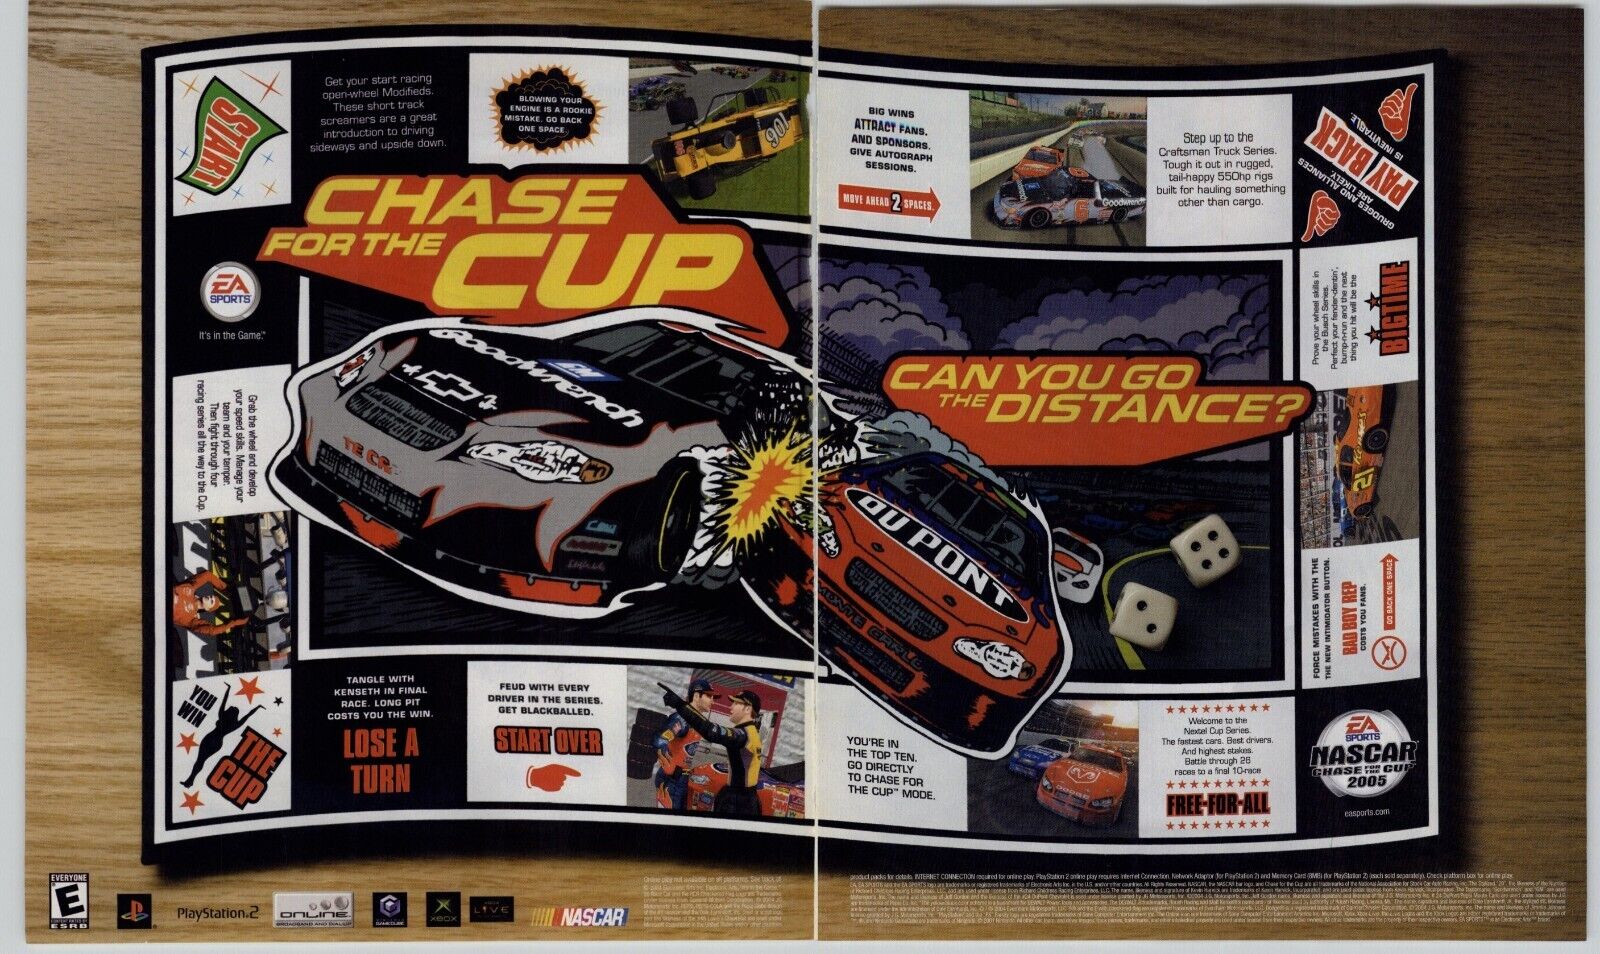 NASCAR Chase For The Cup 2005 PS2 Xbox Racing Video Game Art Vintage Print Ad 